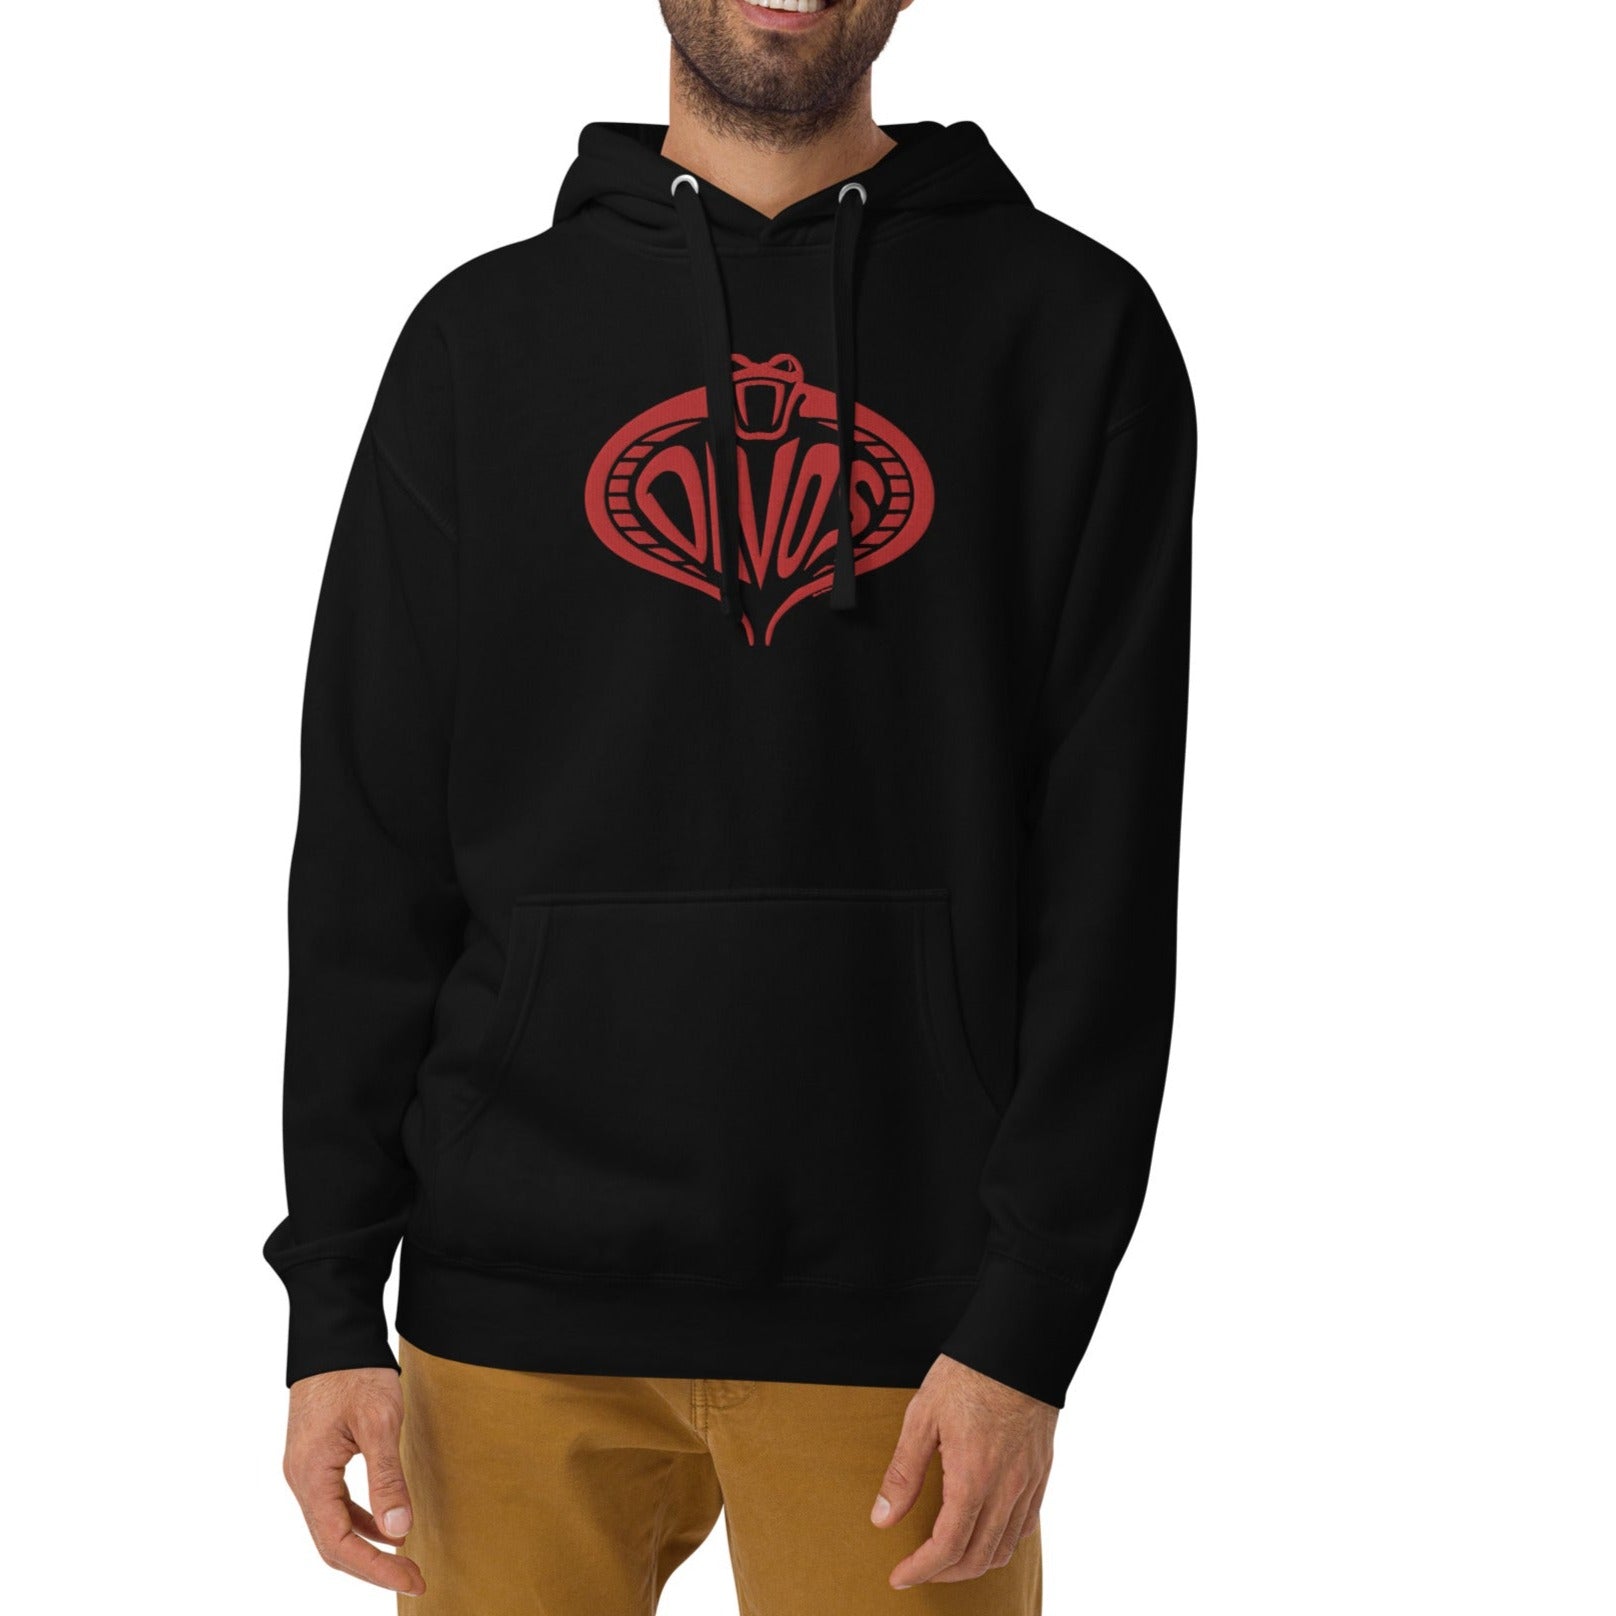 Davos Lizard People Embroidered Logo Hoodie